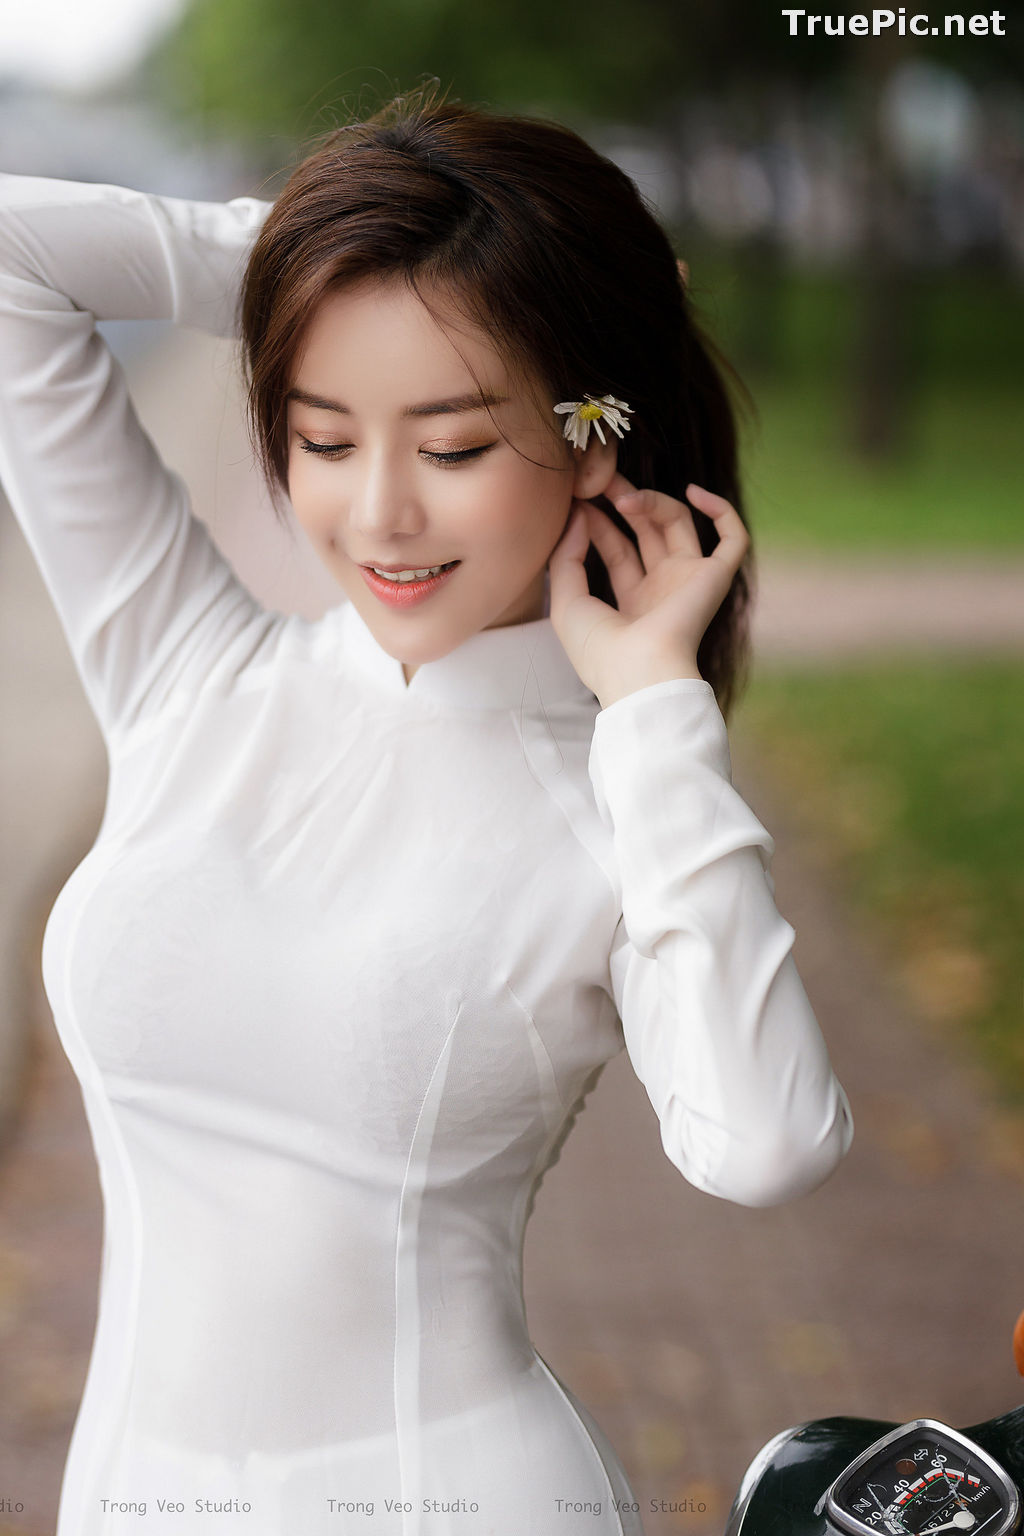 Image The Beauty of Vietnamese Girls with Traditional Dress (Ao Dai) #1 - TruePic.net - Picture-28